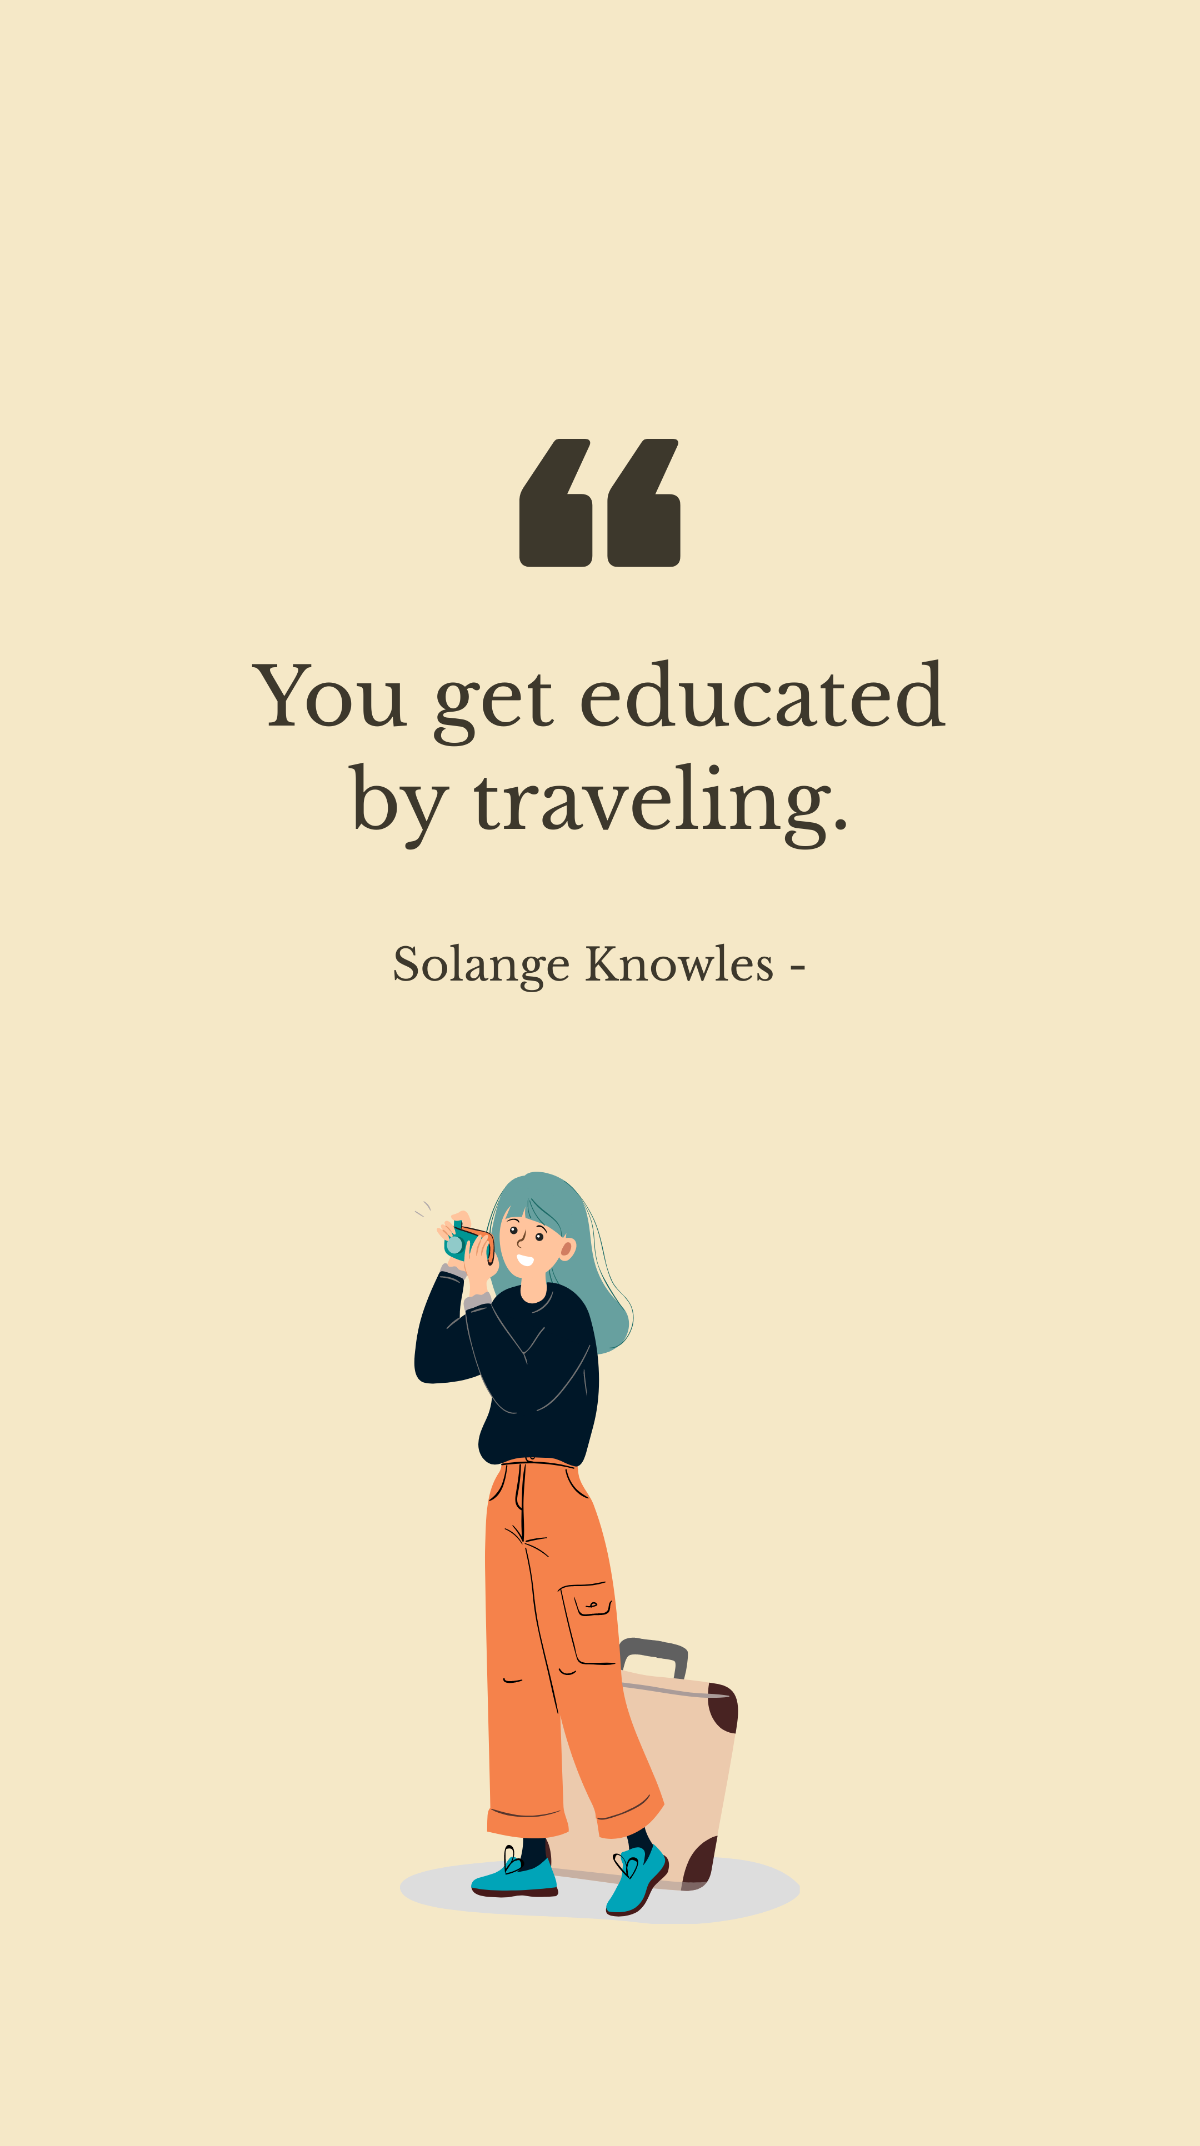 Free Solange Knowles - You get educated by traveling. Template